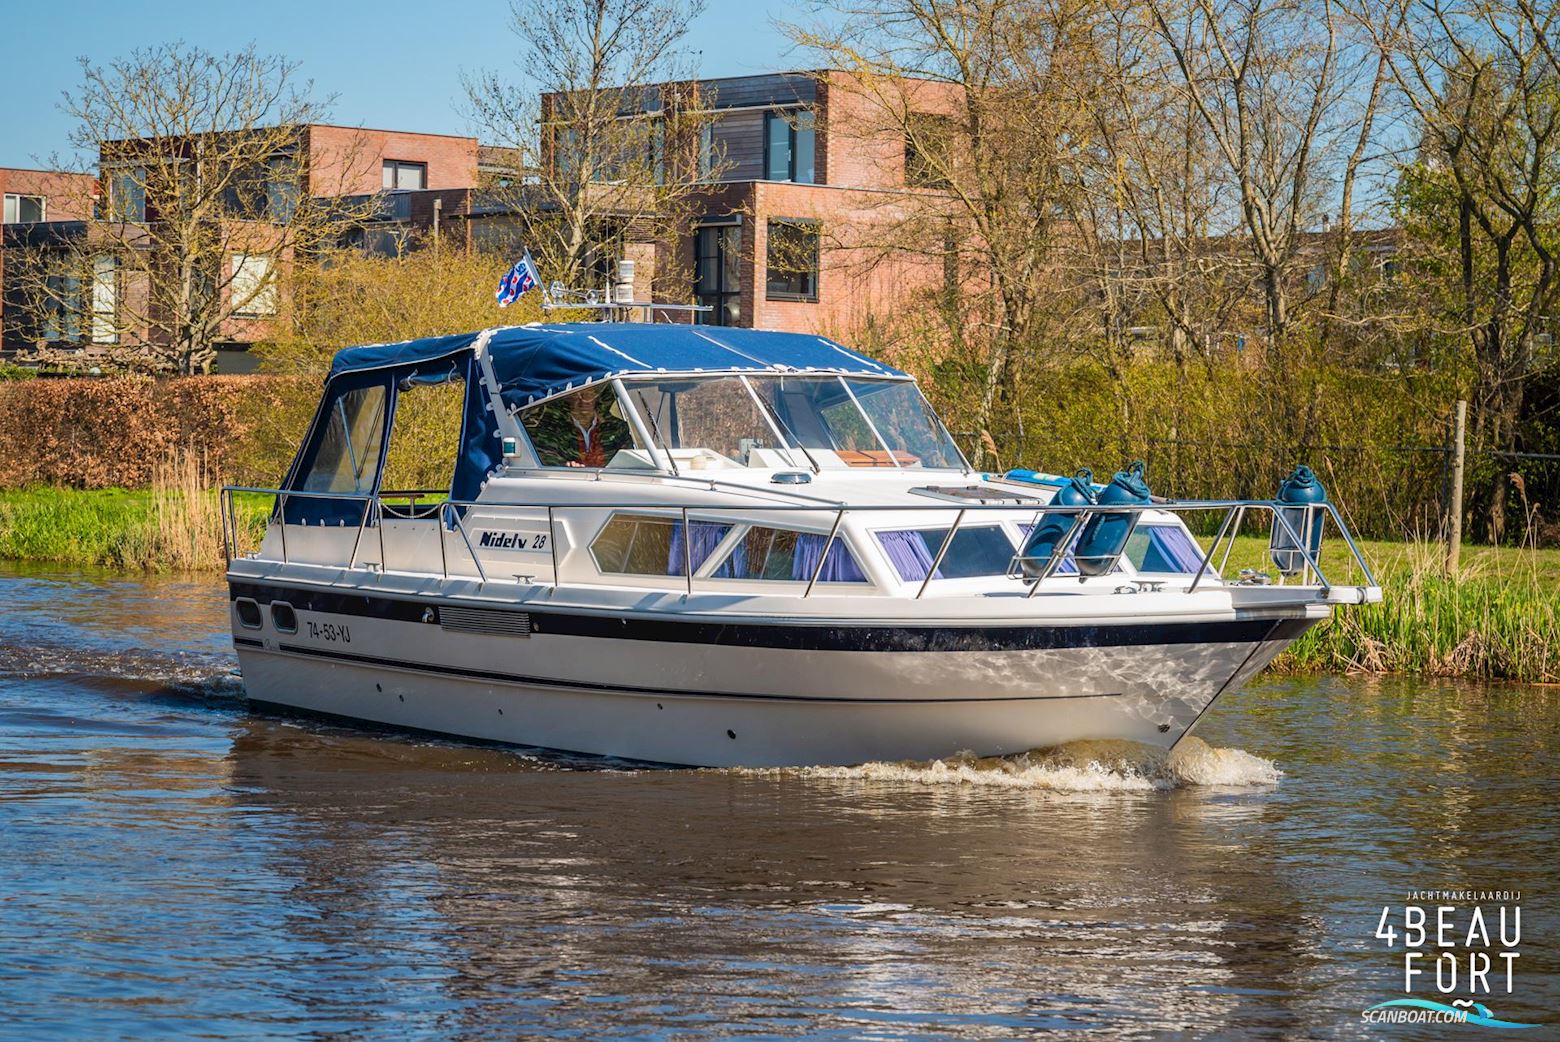 Nidelv 28 Classic Motor boat 2004, with Yanmar engine, The Netherlands